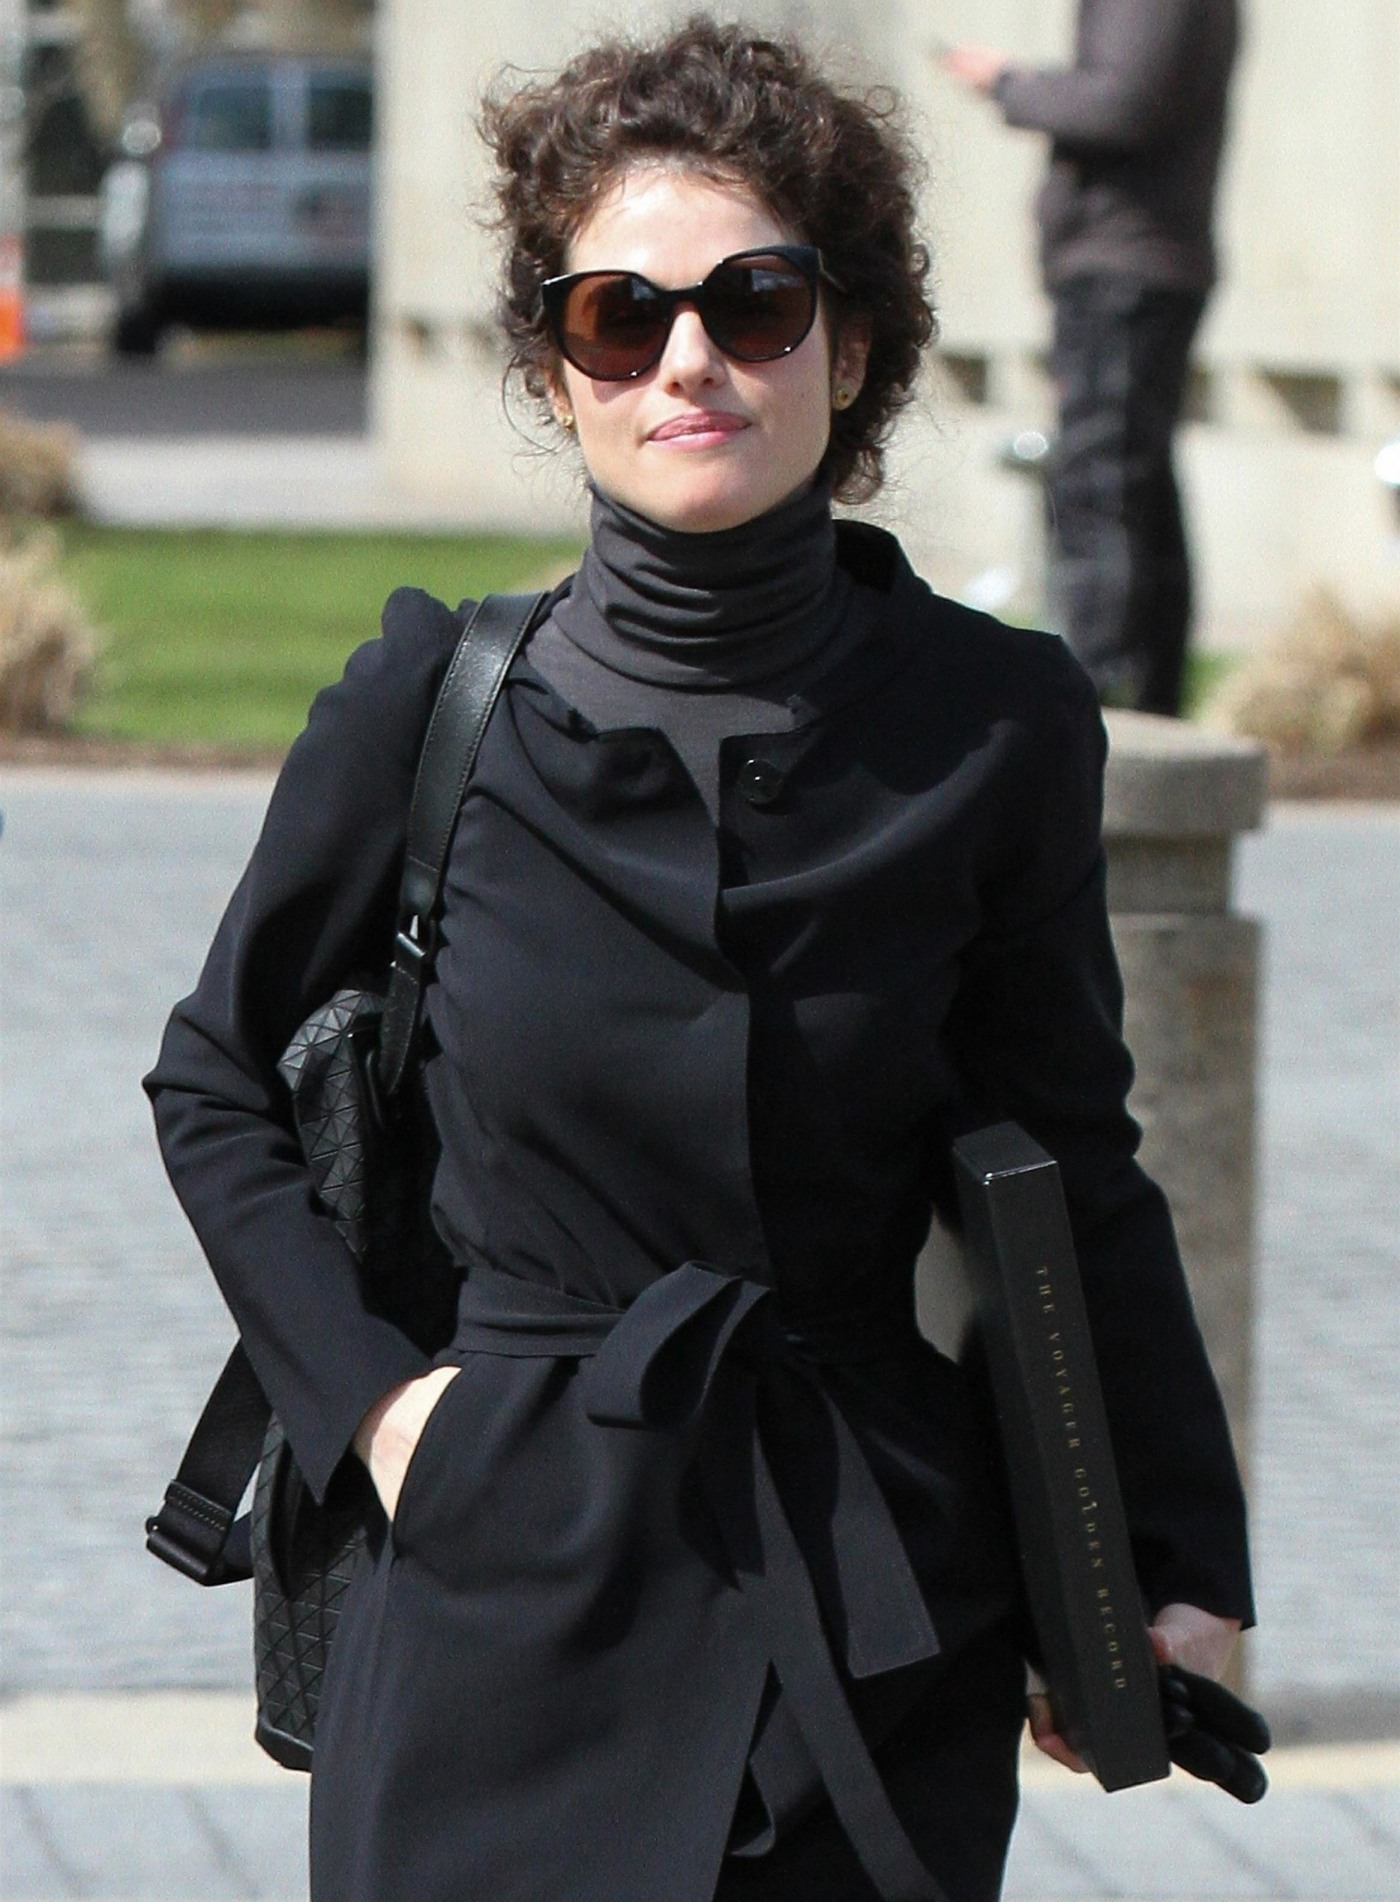 Neri Oxman rocks all black and carries "The Voyager Record'' while heading to class at MIT